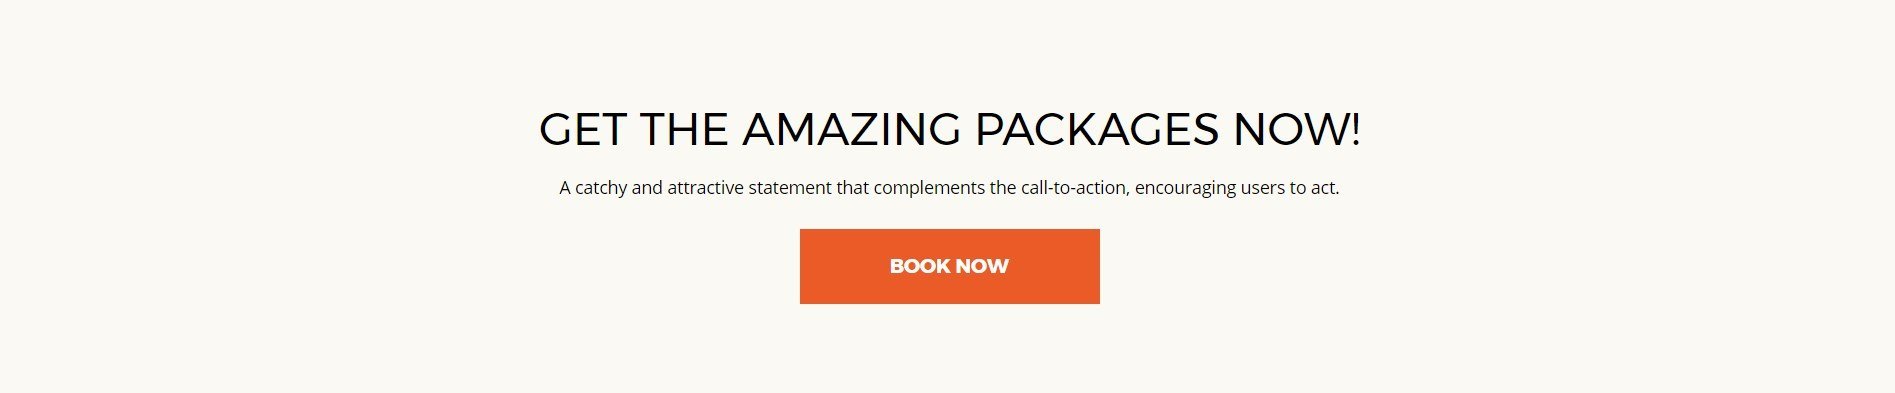 call-to-action - travel offer page template